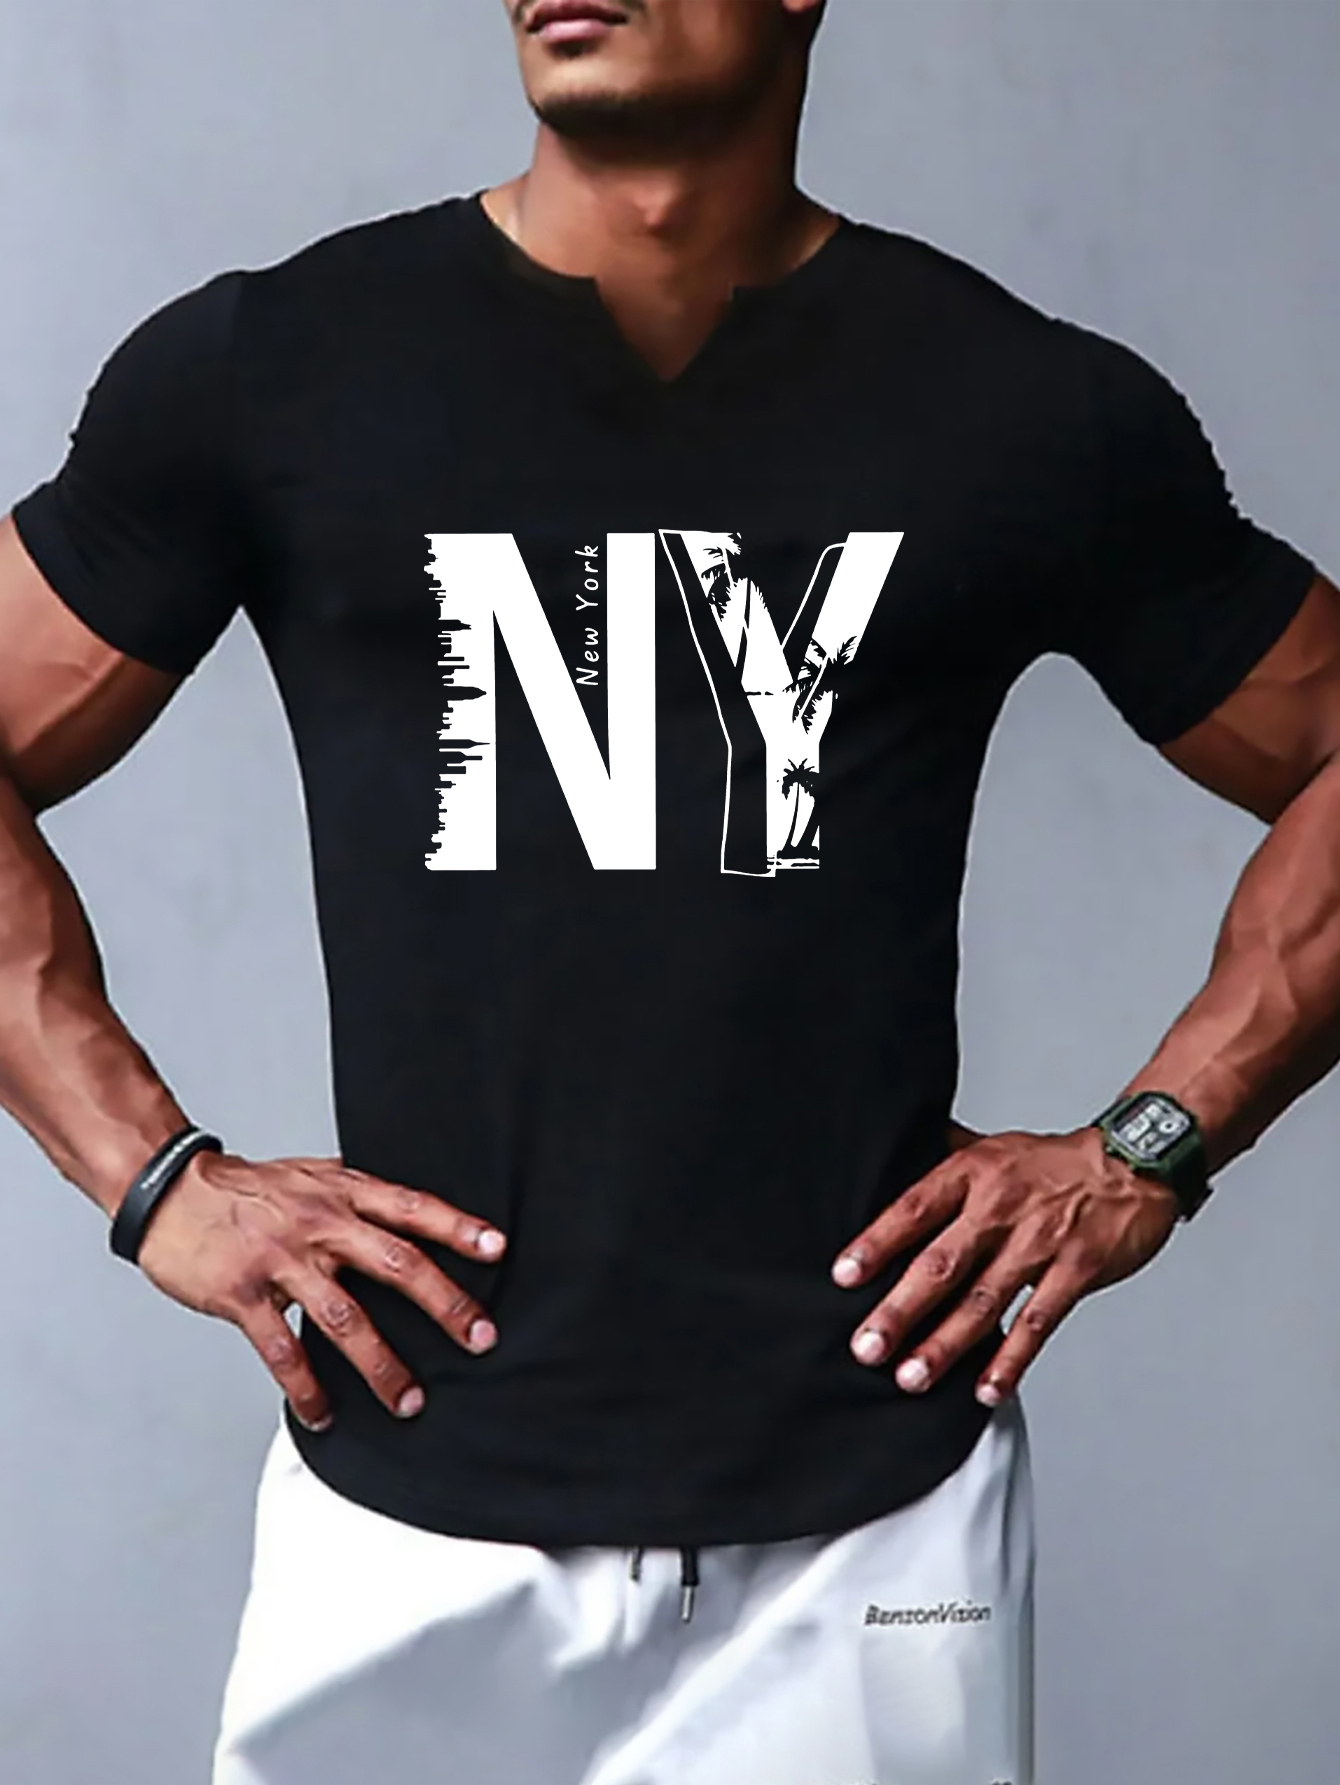 Stylish Letter Pattern Print Men's Comfy Chic T-shirt, Graphic Tee